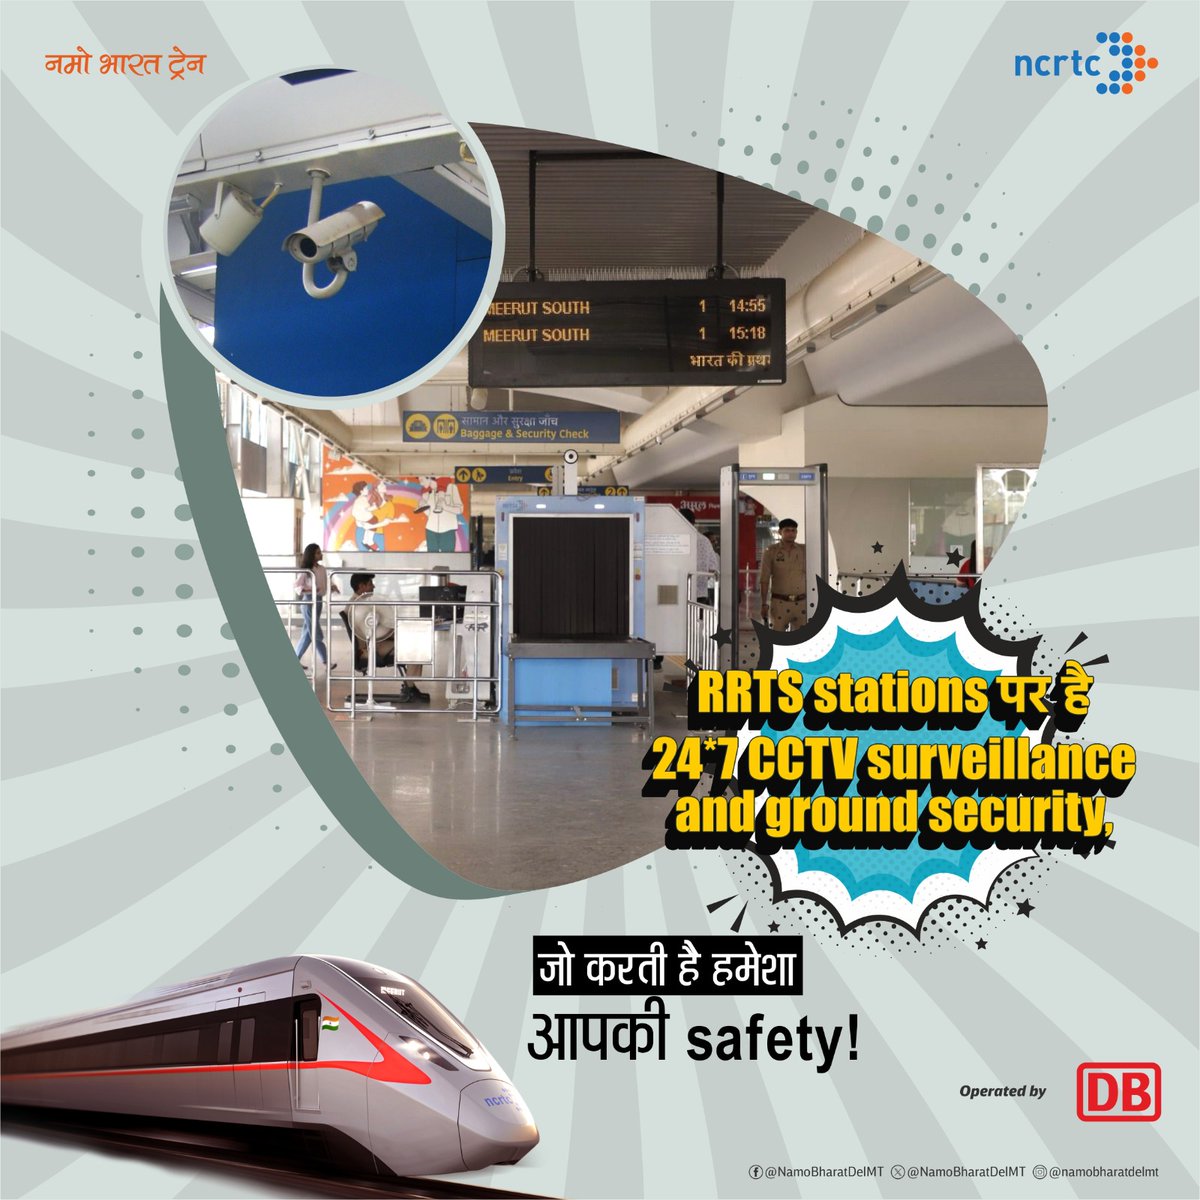 With round-the-clock CCTV surveillance and ground security, #RRTSstation ensures the safety of every commuter. 

#NCRTC #DBRRTS #RRTS